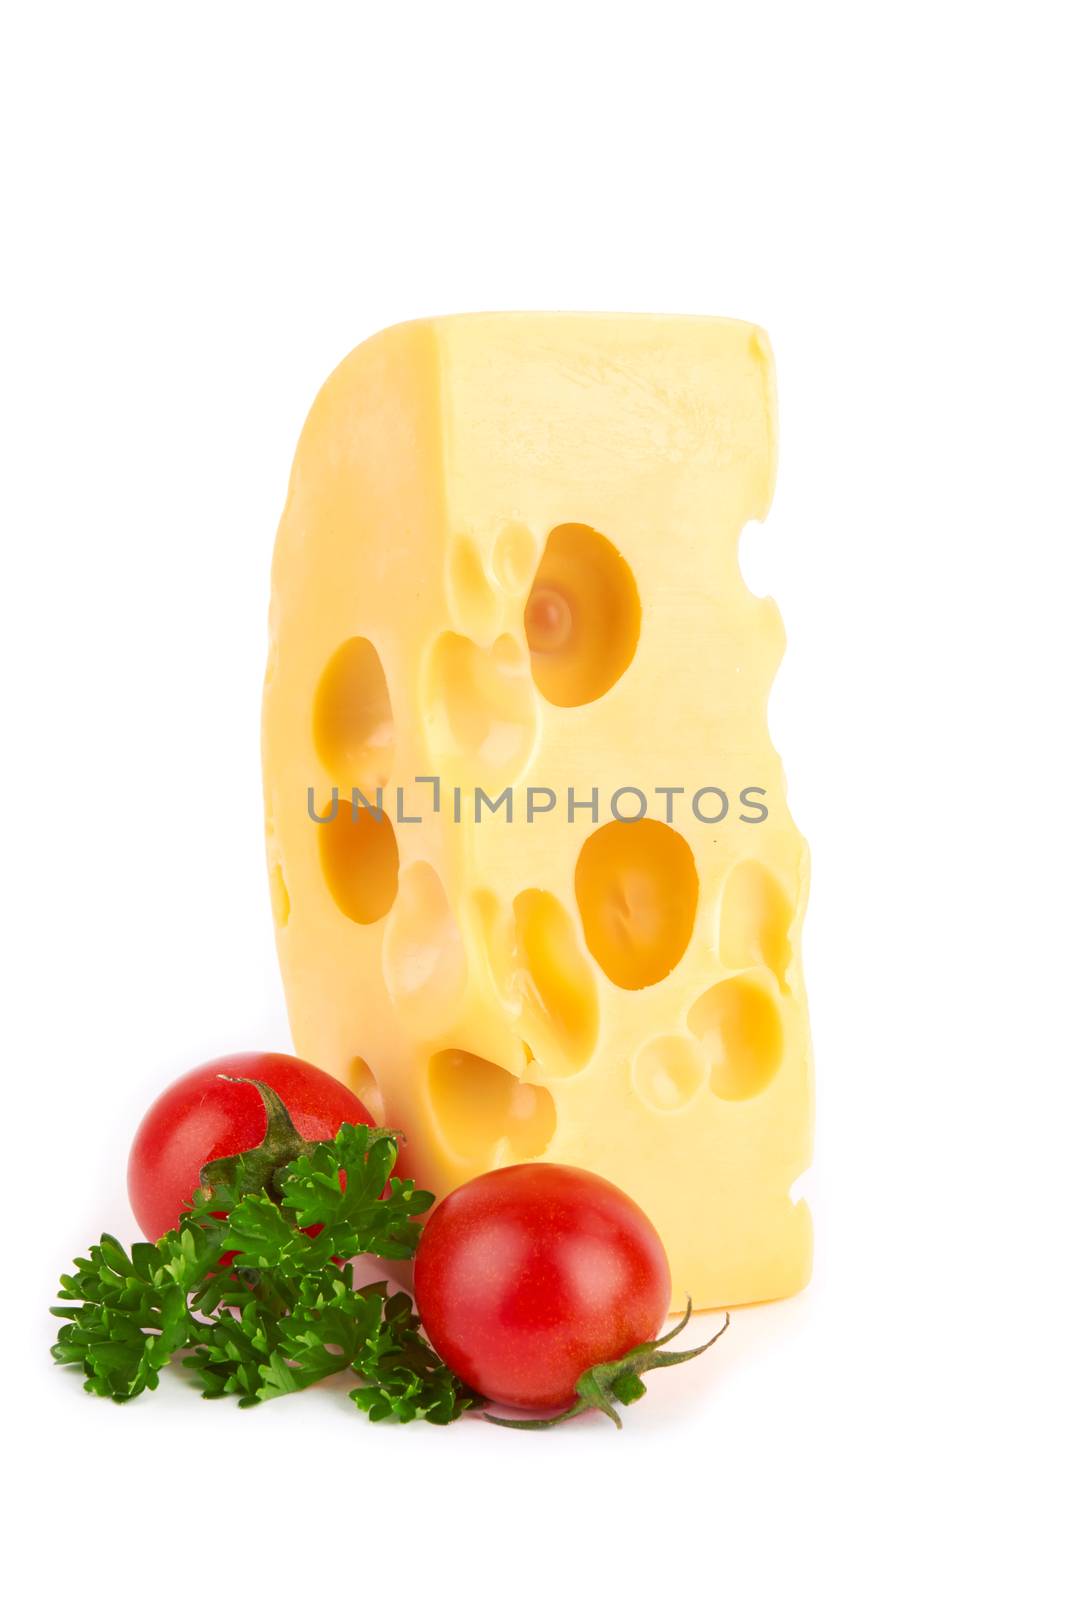 Piece of cheese isolated on white background